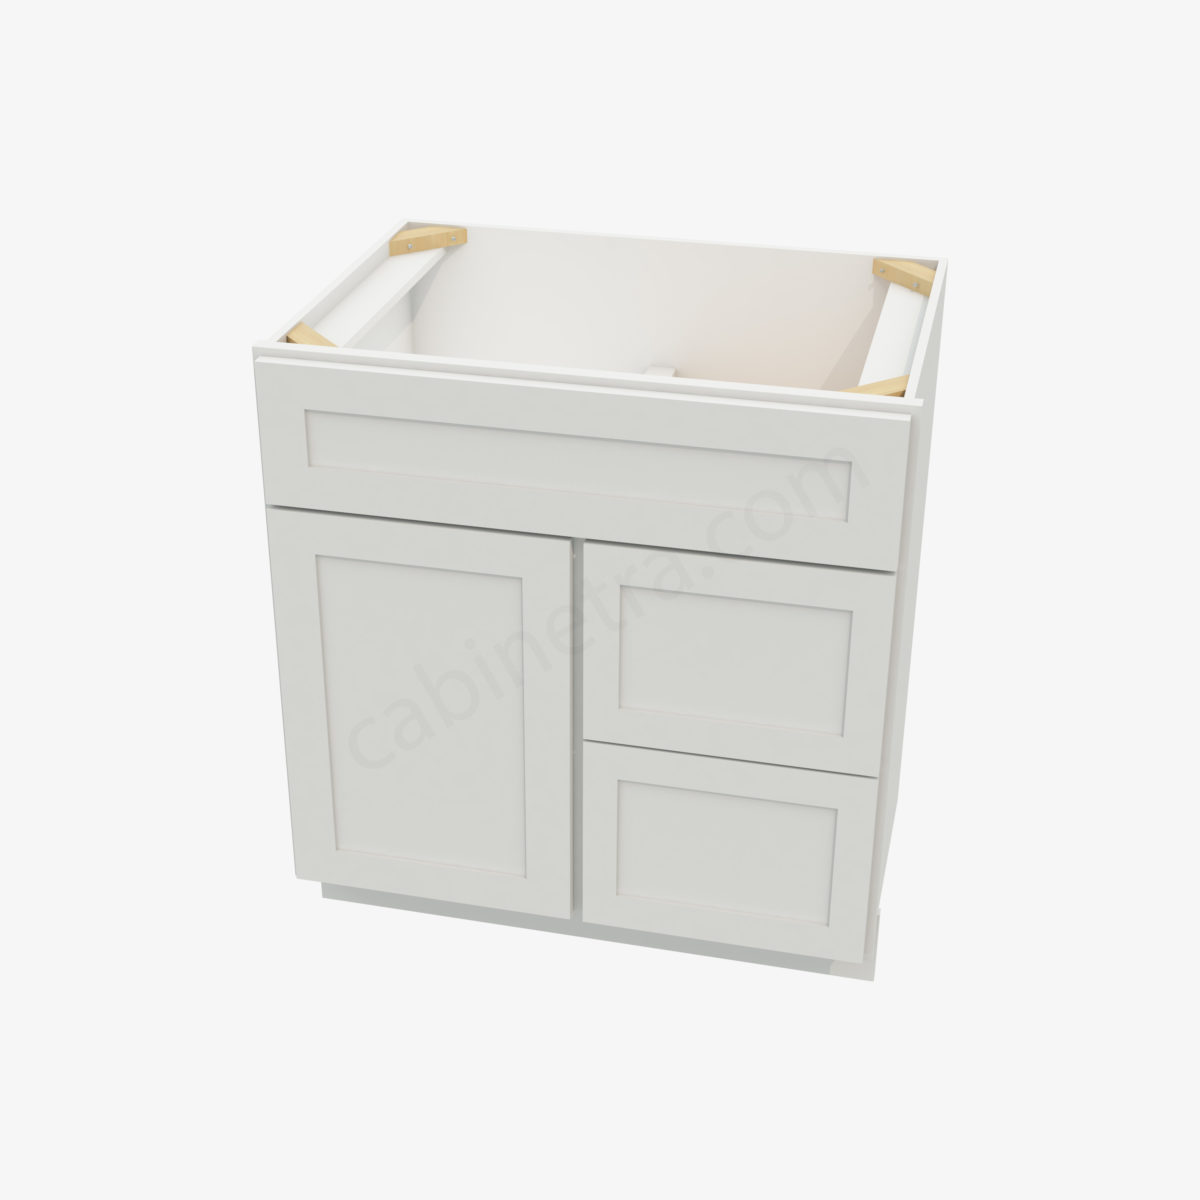 AW S3021DR 34 3 Forevermark Ice White Shaker Cabinetra scaled